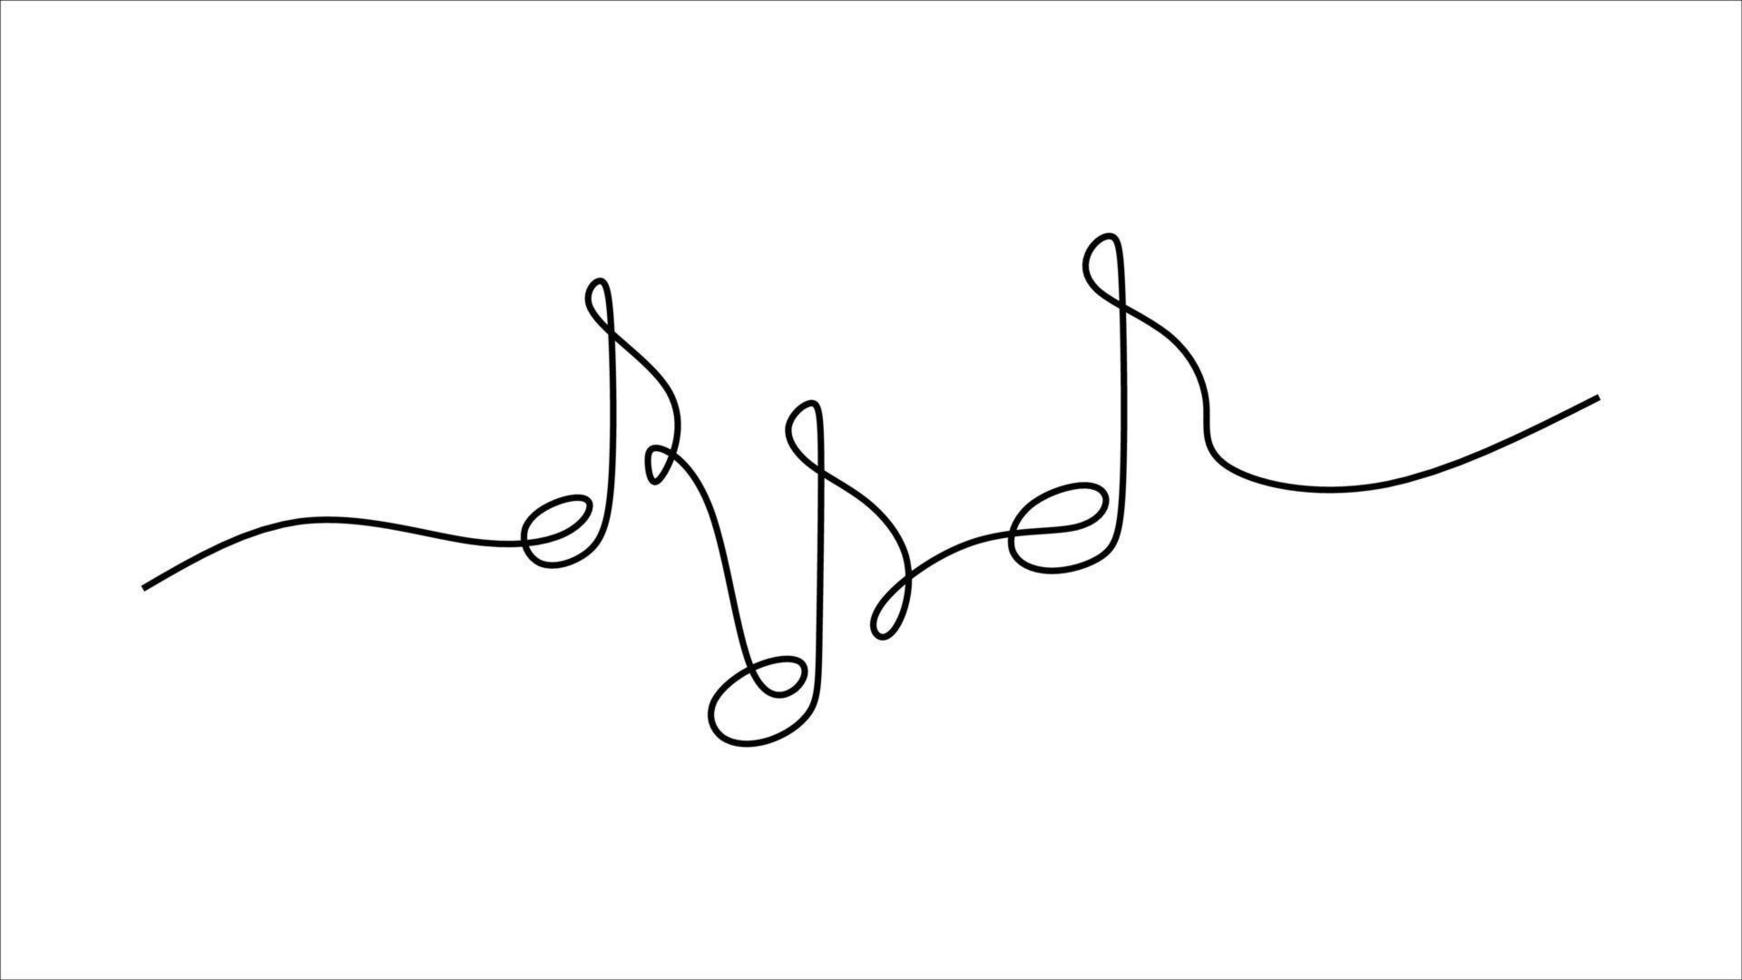 Music Note oneline continuous single editable line art vector